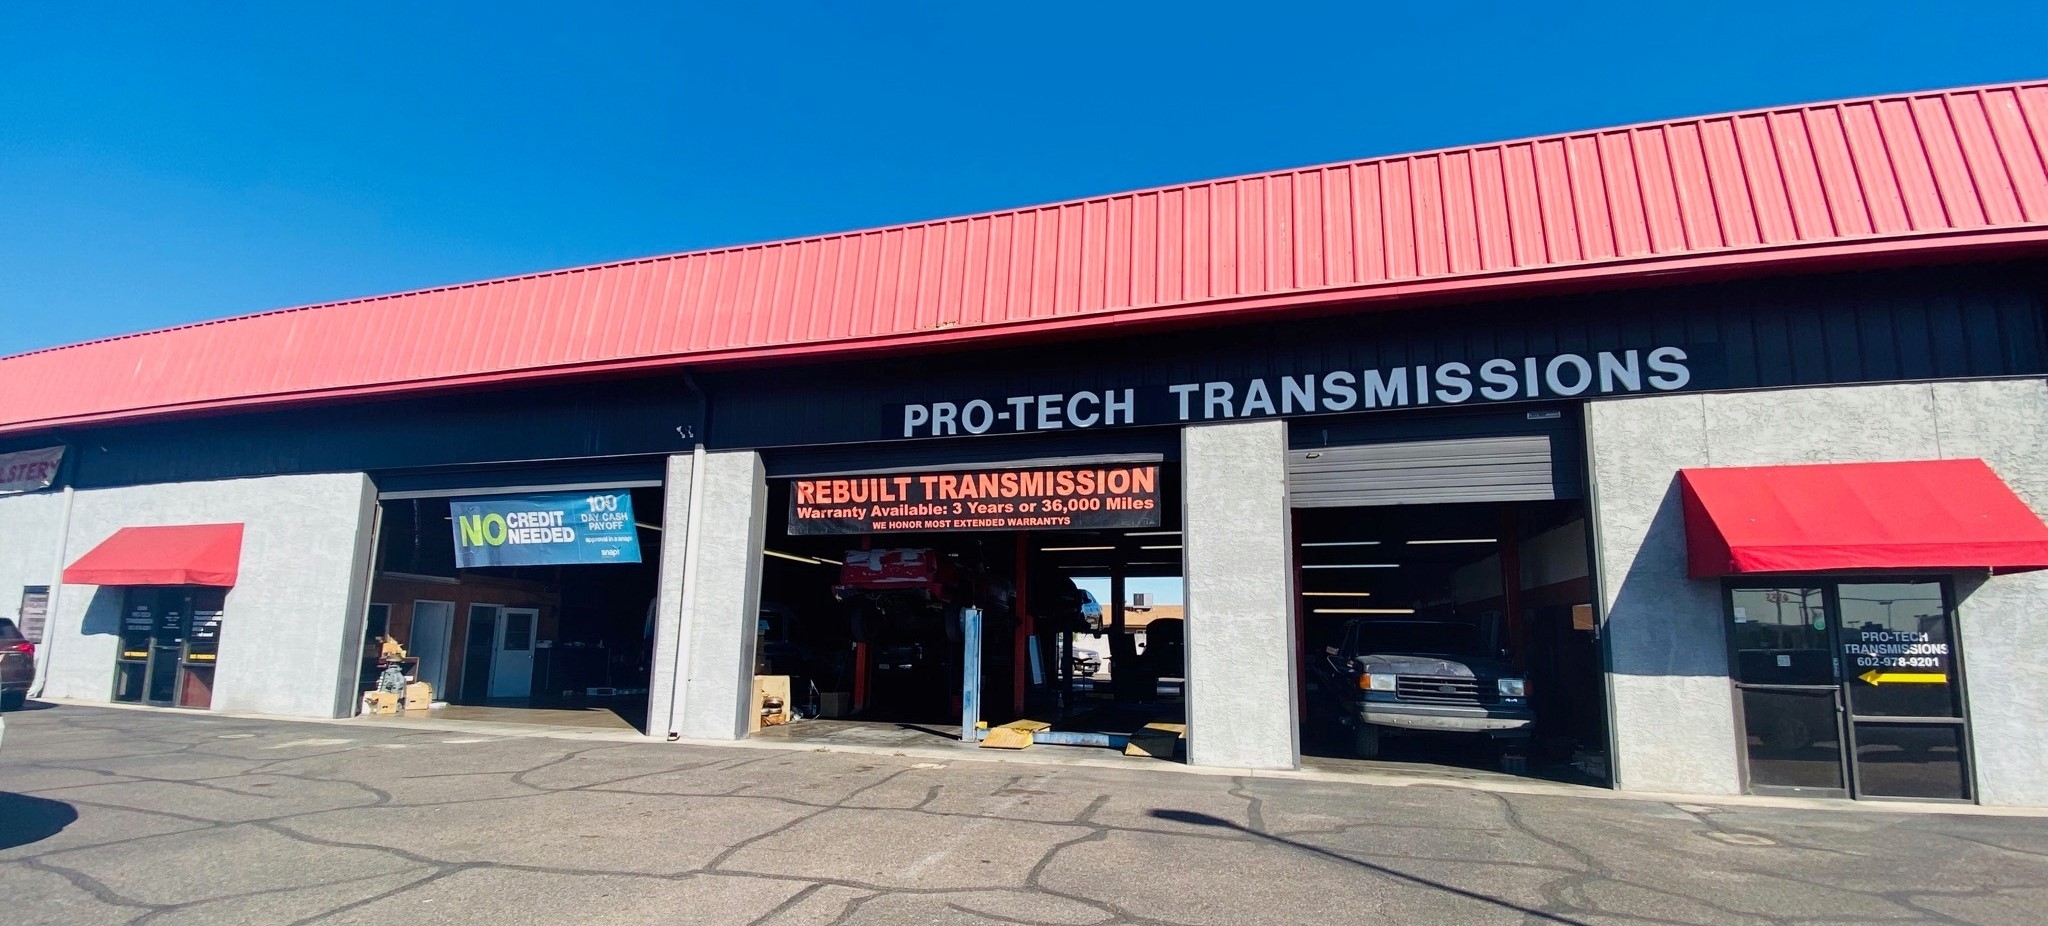 What is the most effective Transmission Shop in Glendale, AZ?